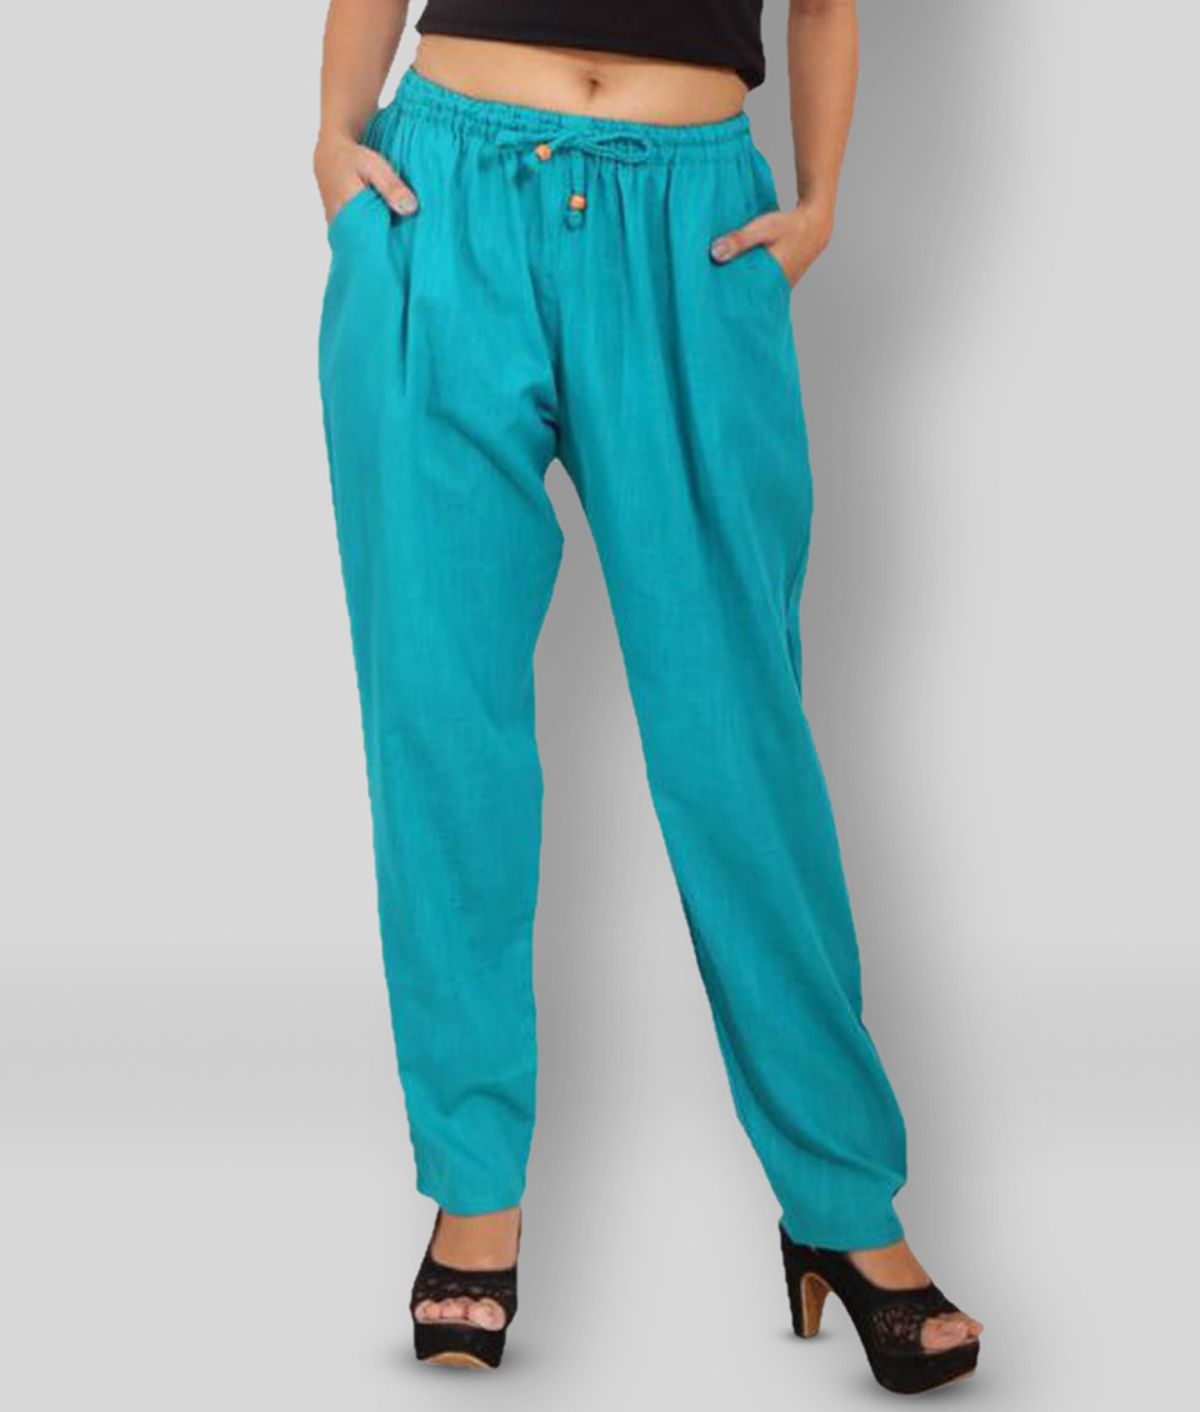     			Lee Moda - Turquoise Cotton Regular Fit Women's Casual Pants  ( Pack of 1 )